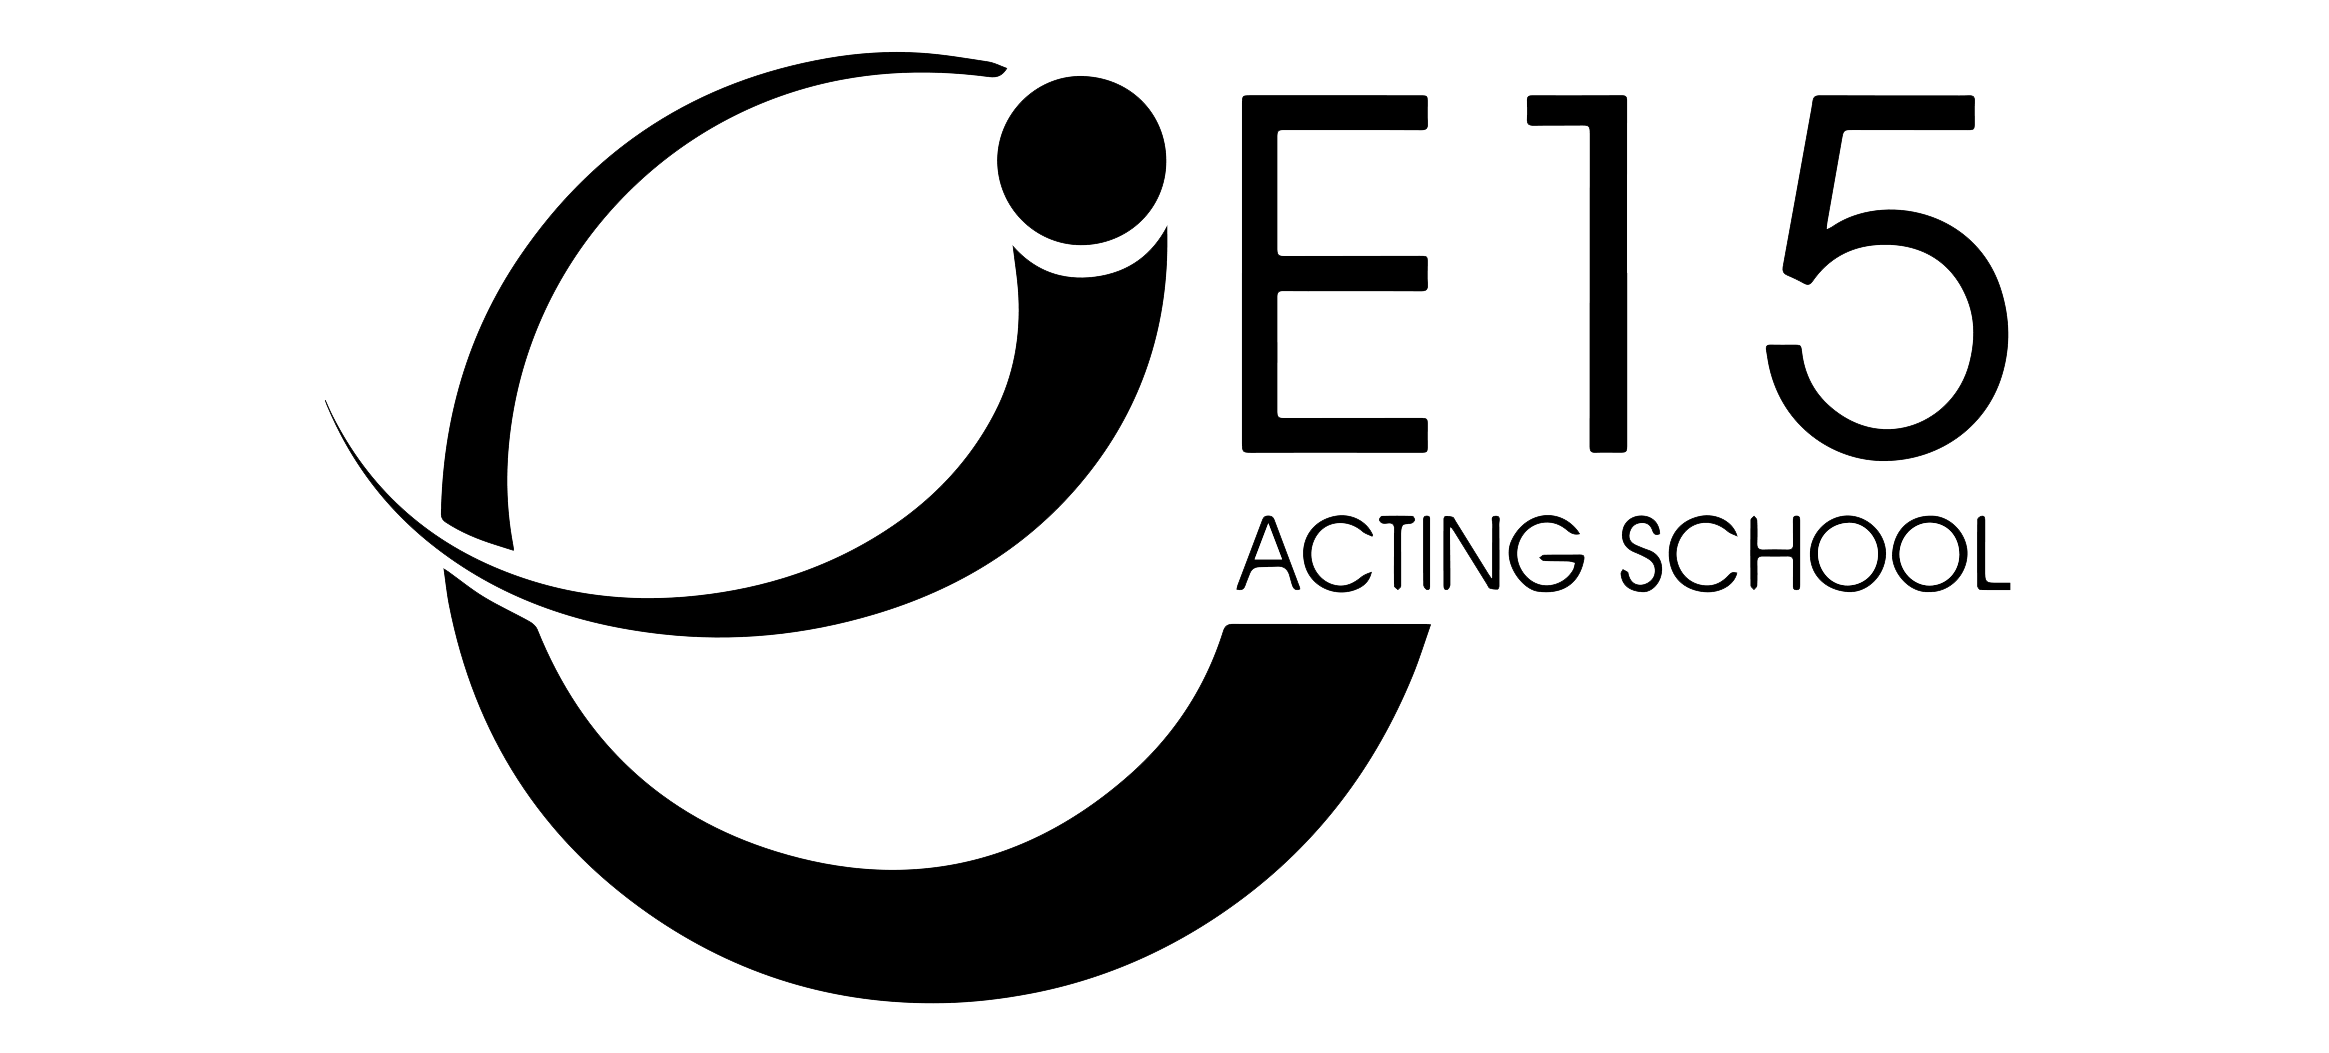 Acting Logo - East 15 Acting School logo in Black and White.png